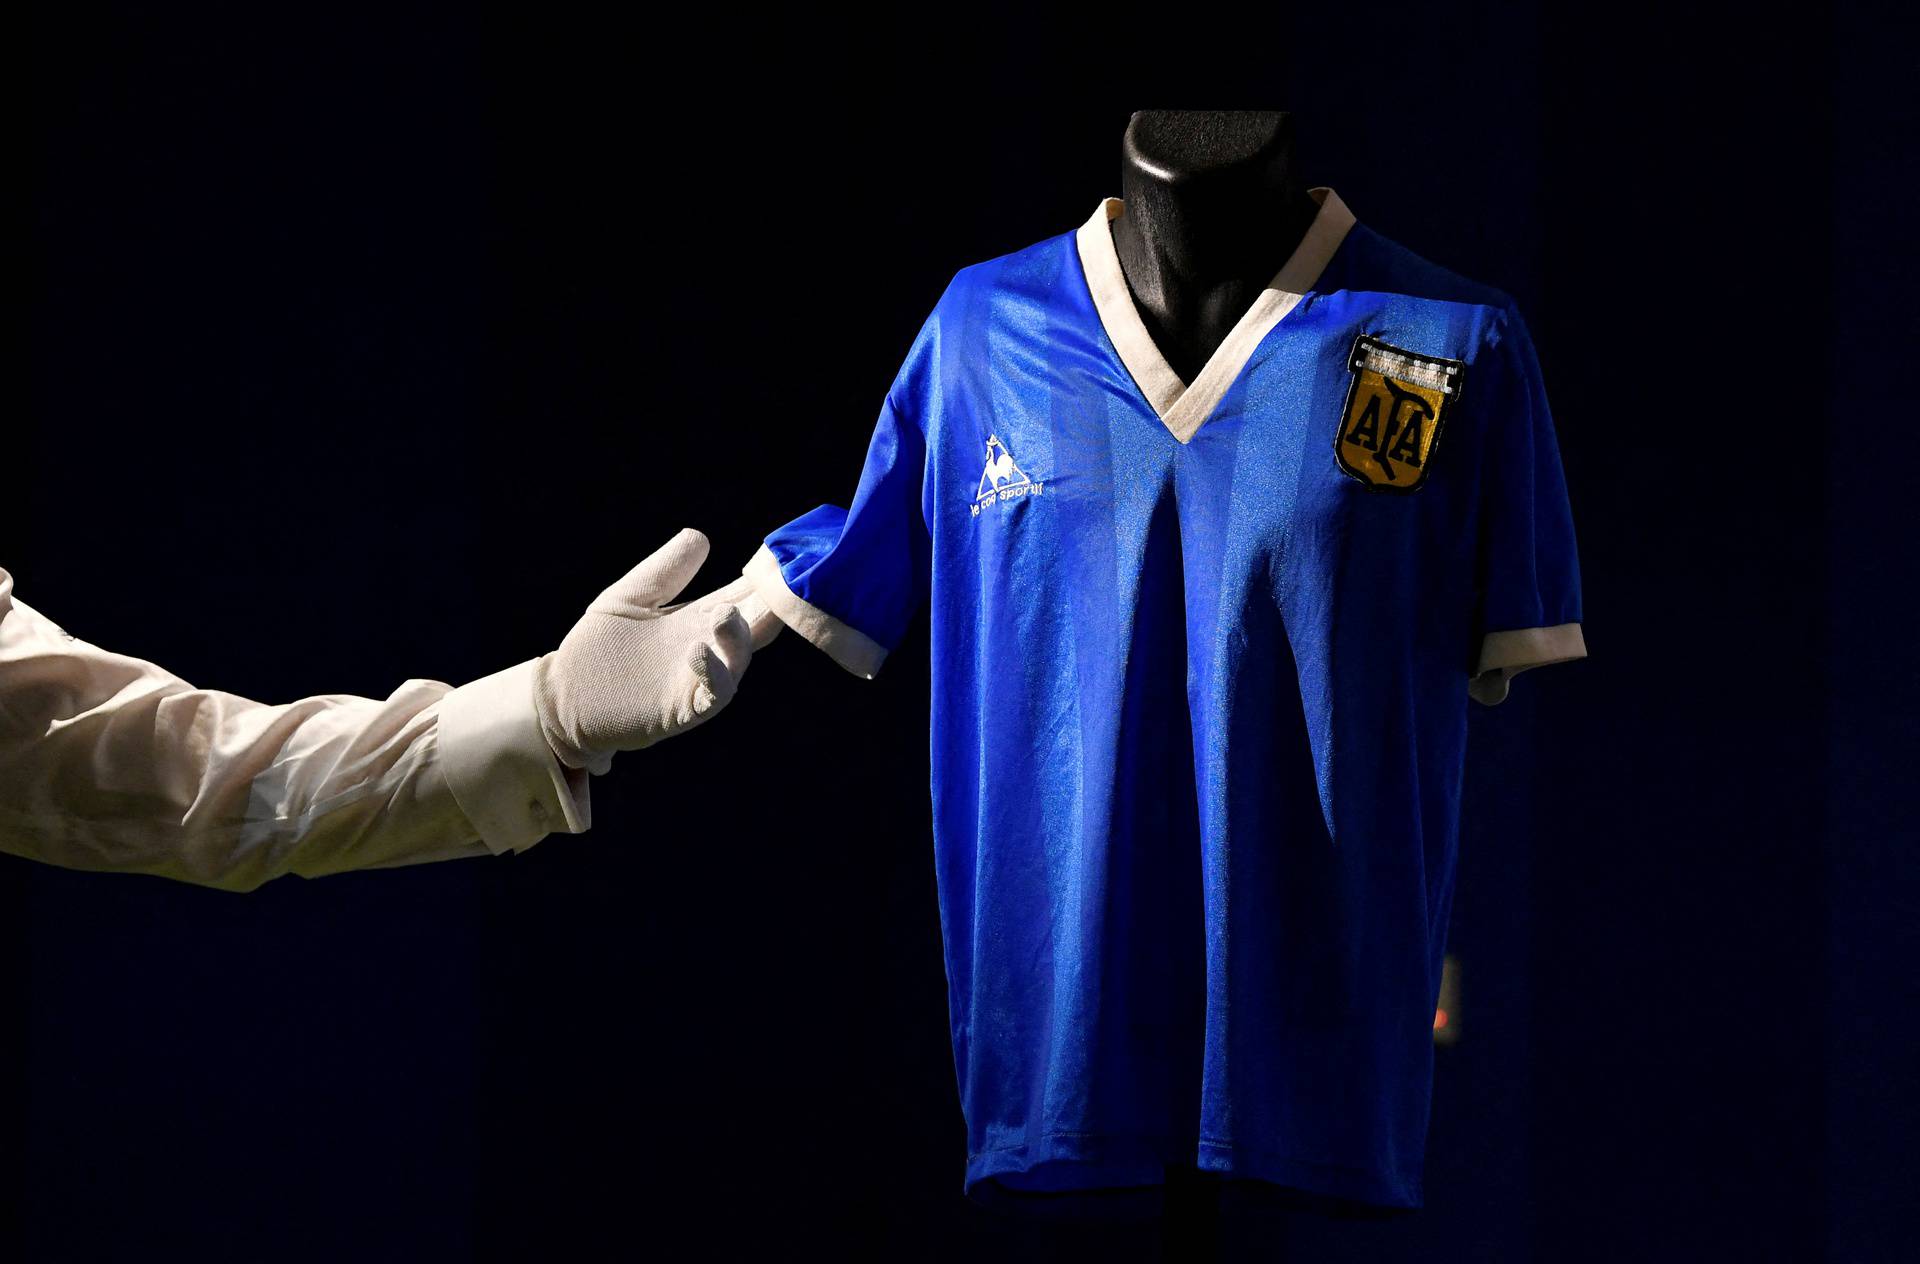 Shirt worn by Argentinian soccer player Maradona is displayed ahead of auction by Sotheby's, in London